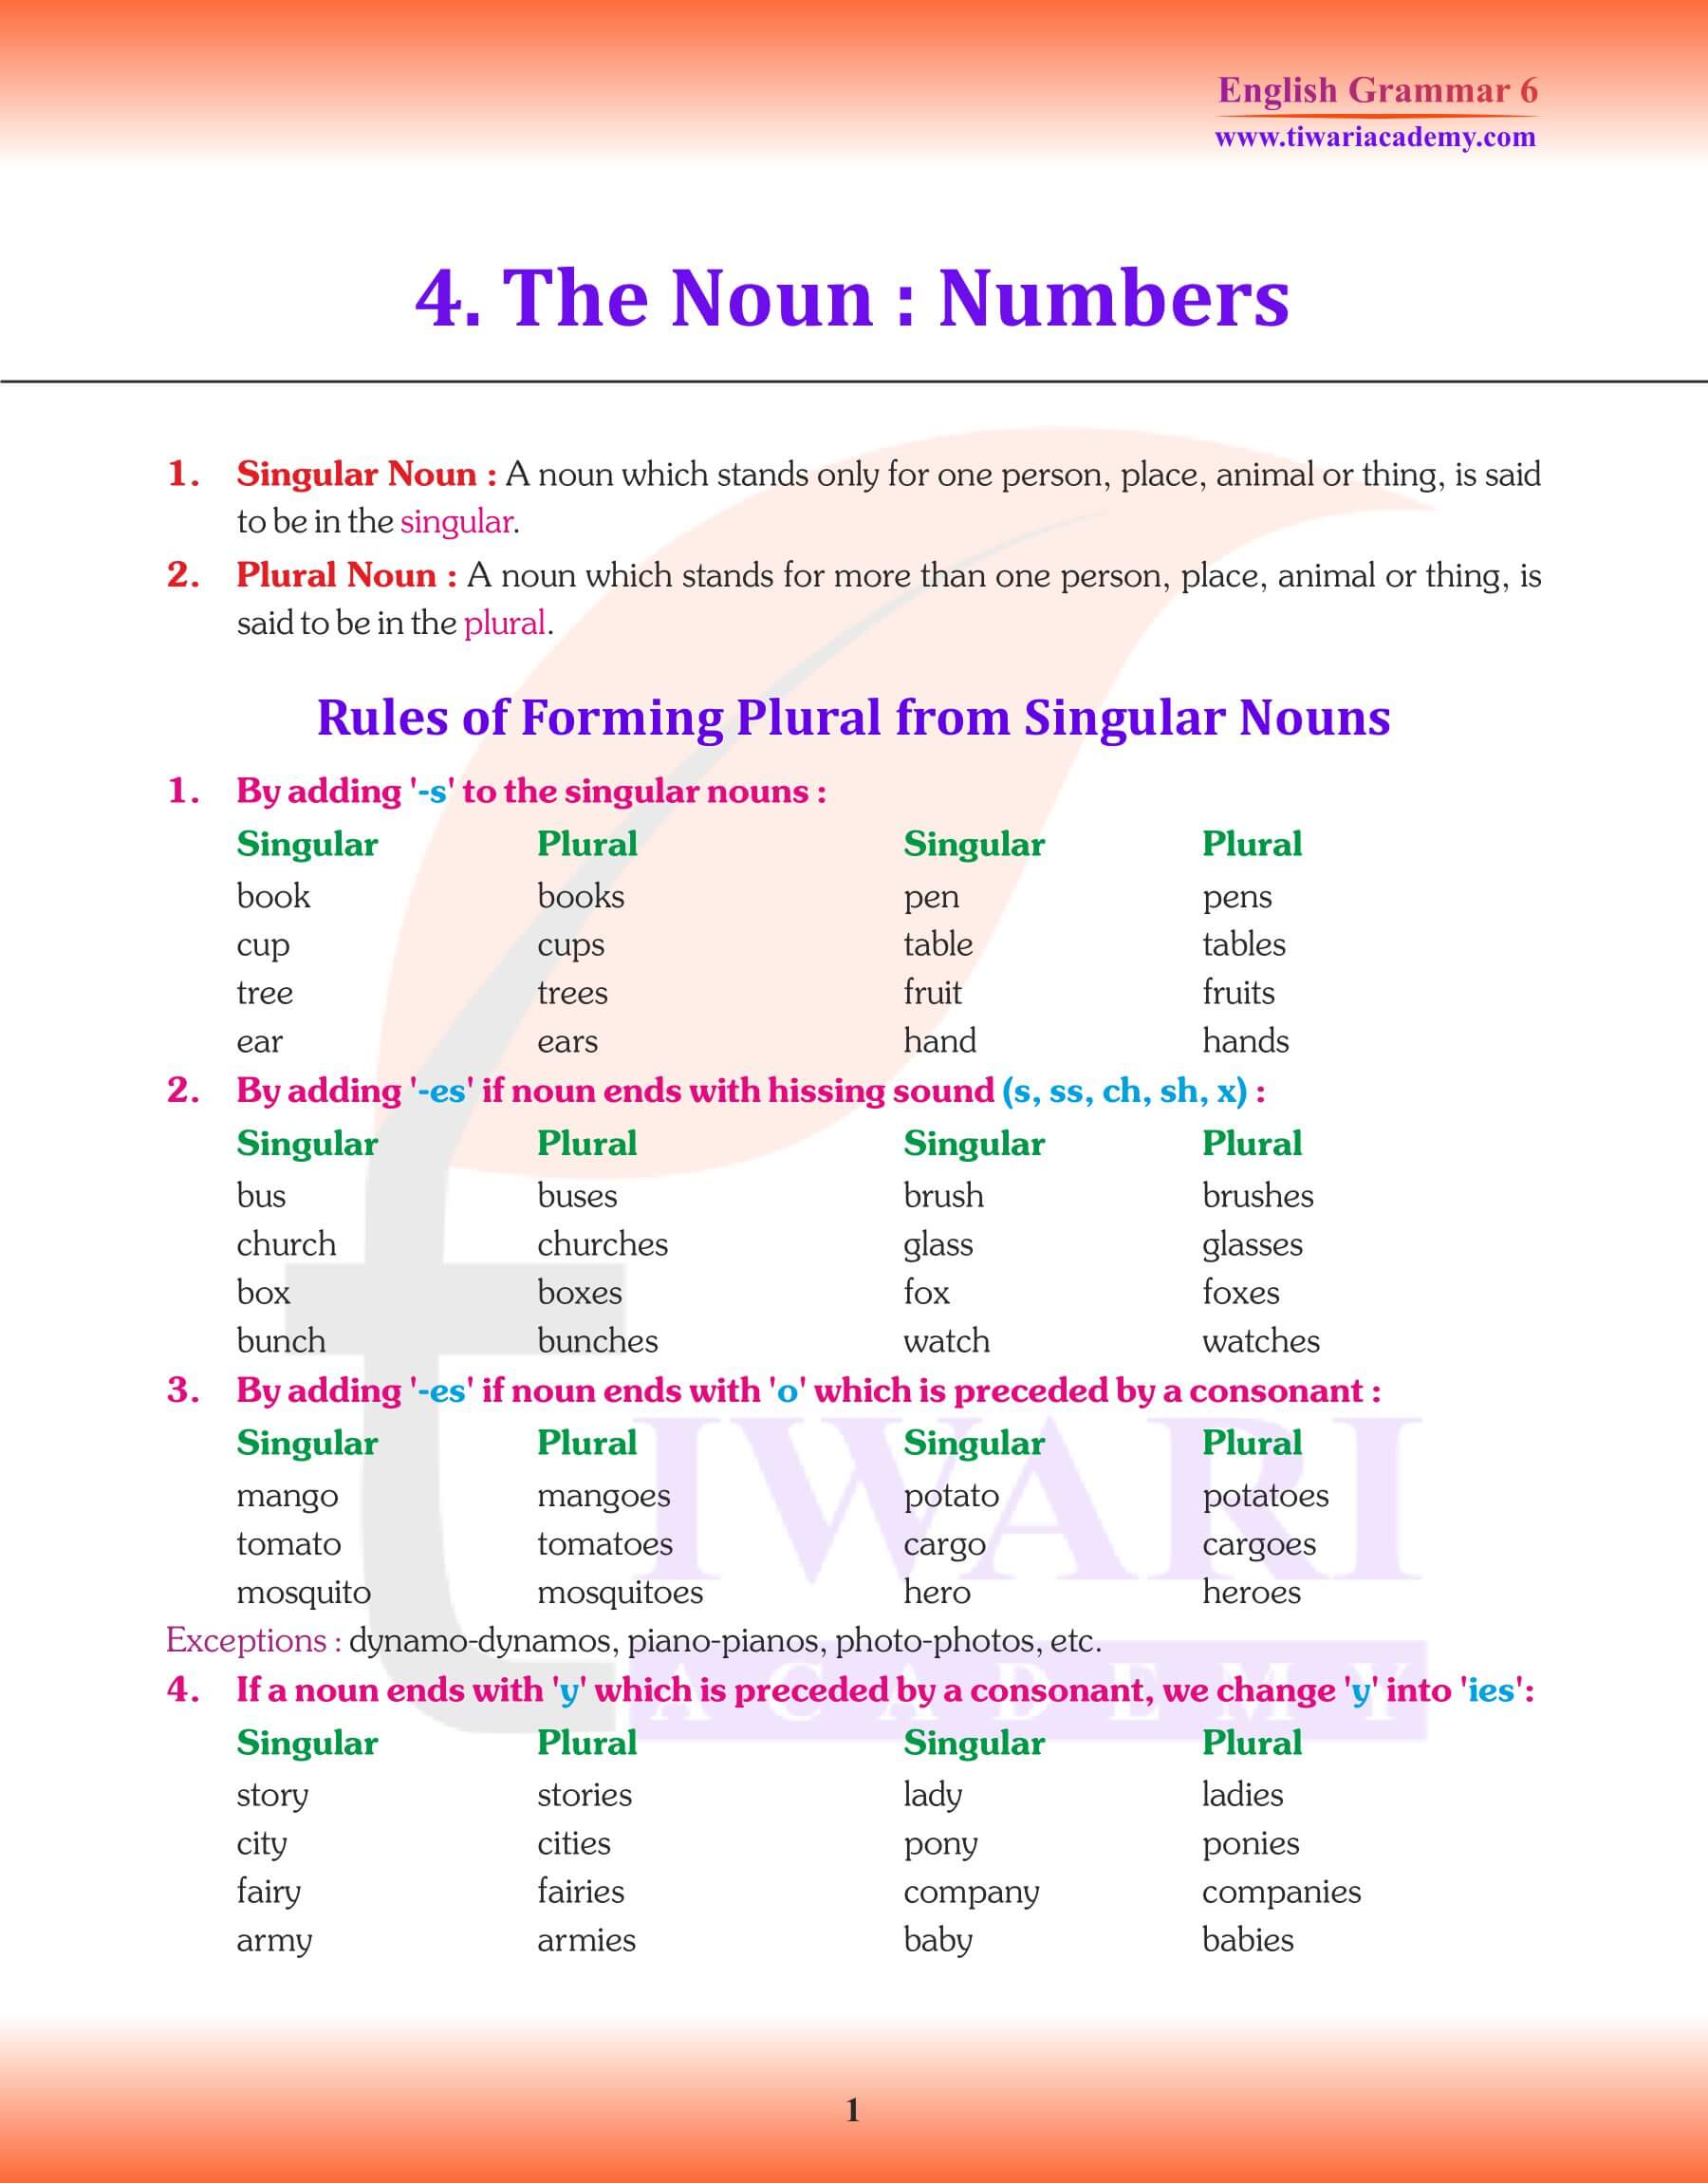 Class 6 English Grammar Chapter 4 Revision Notes